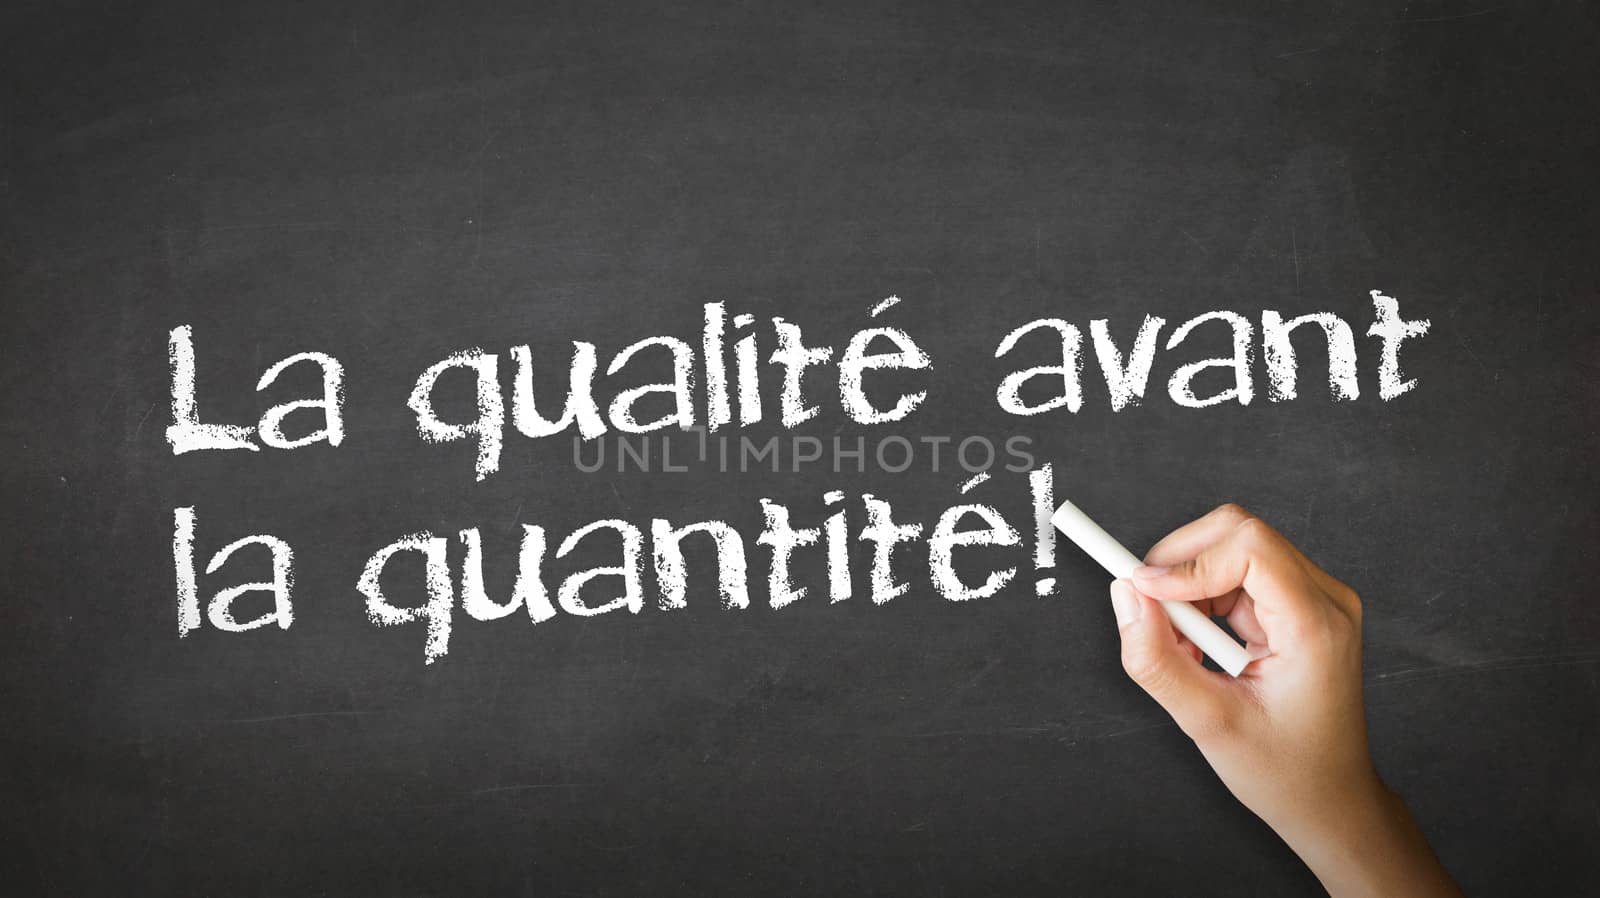 Quality over Quantity (In French) by kbuntu